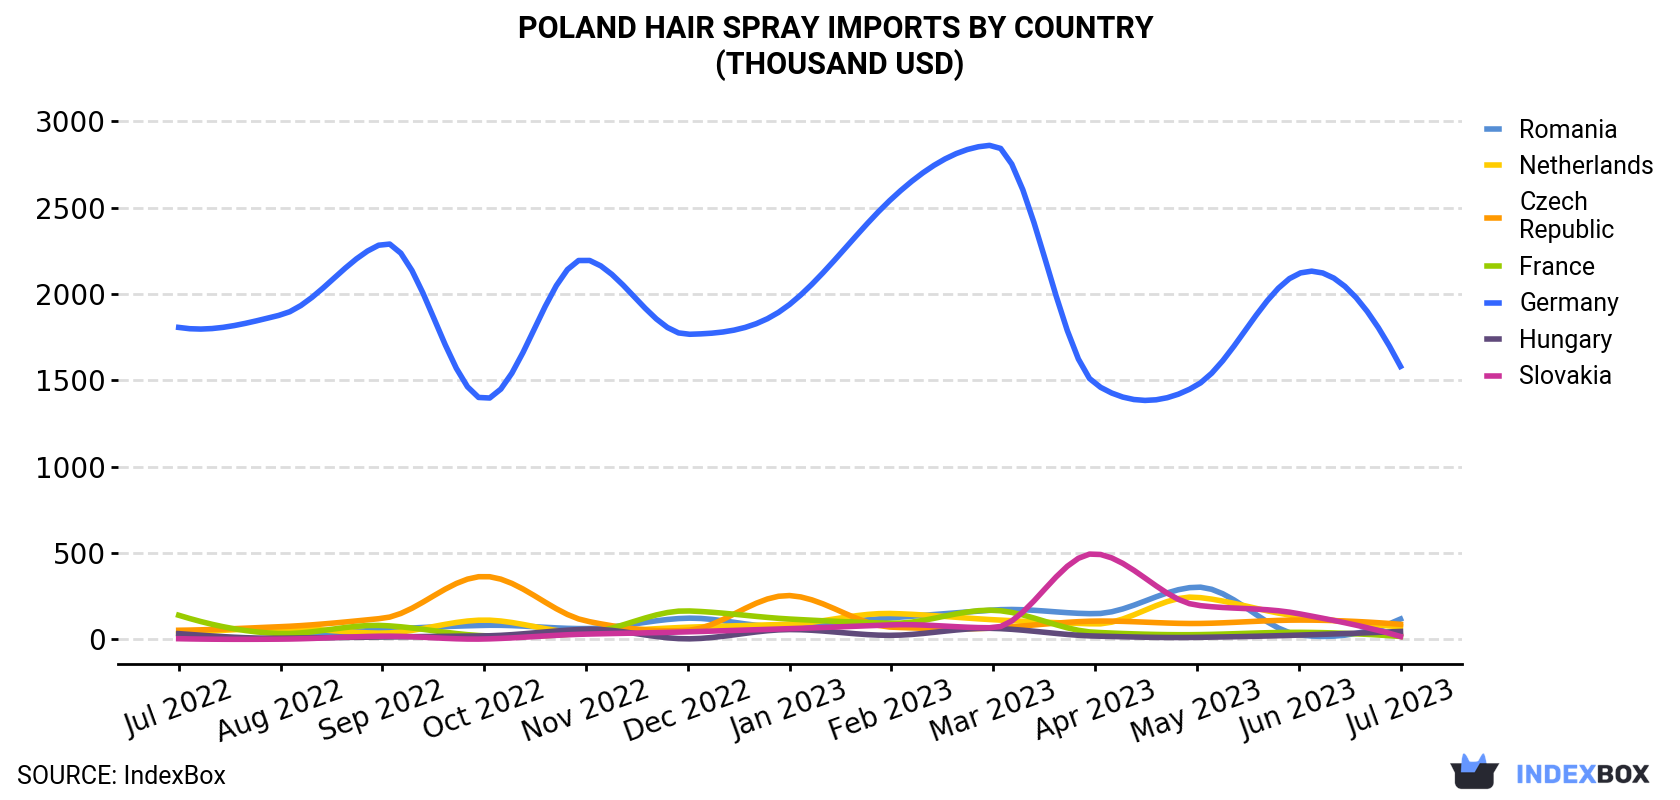 Poland Hair Spray Imports By Country (Thousand USD)